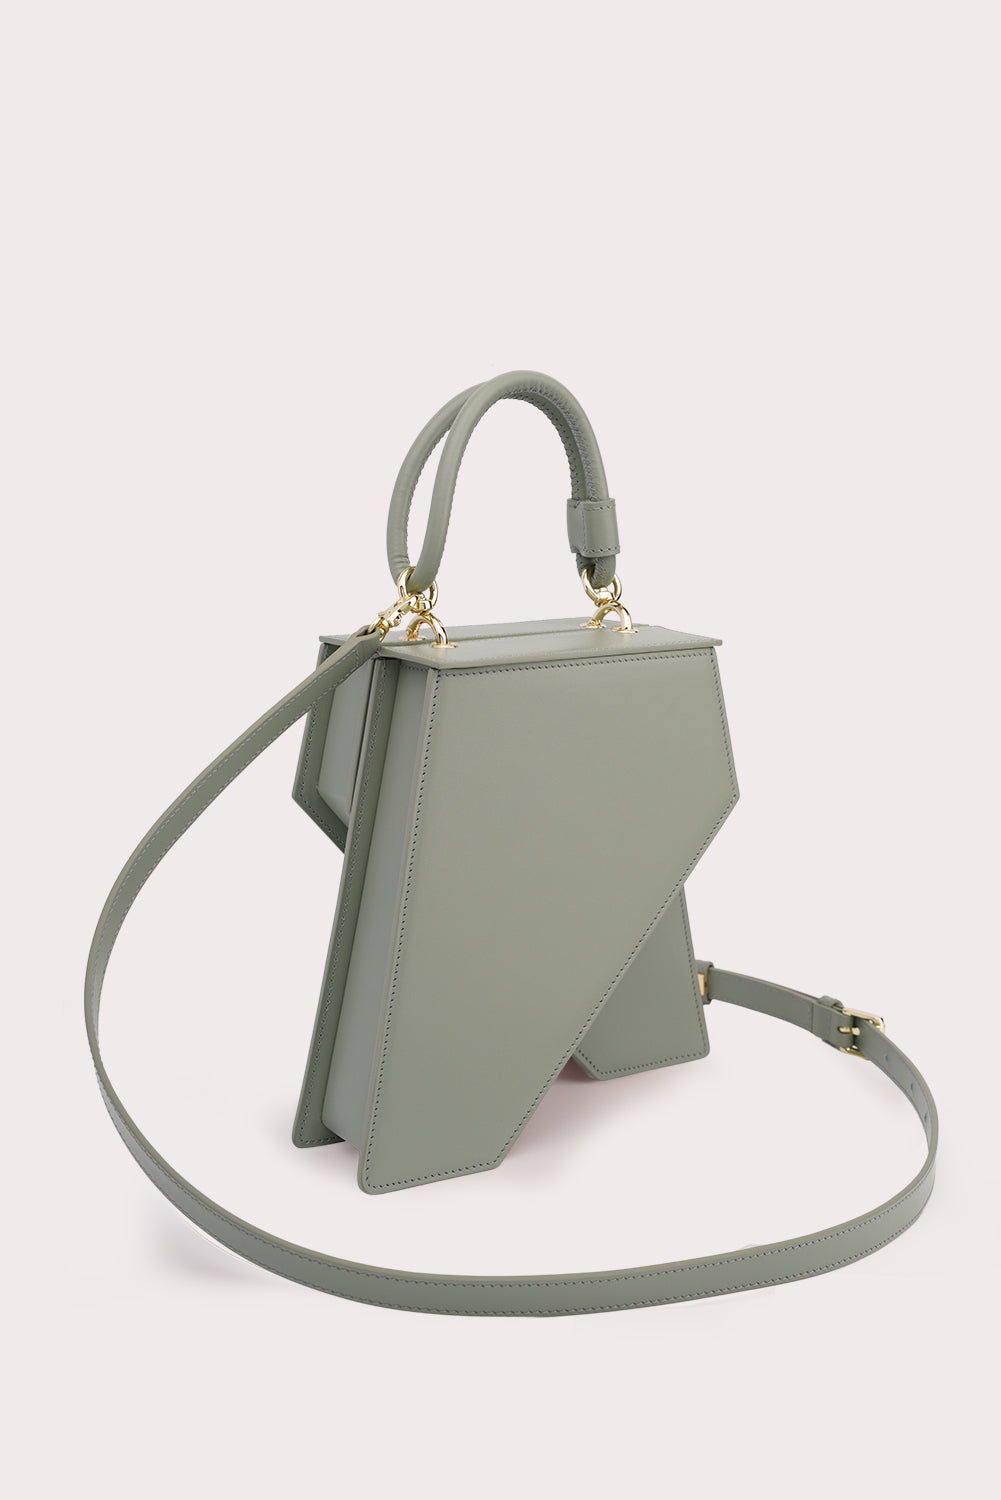 Trapezoid Tapo Bag in Matcha Green-4